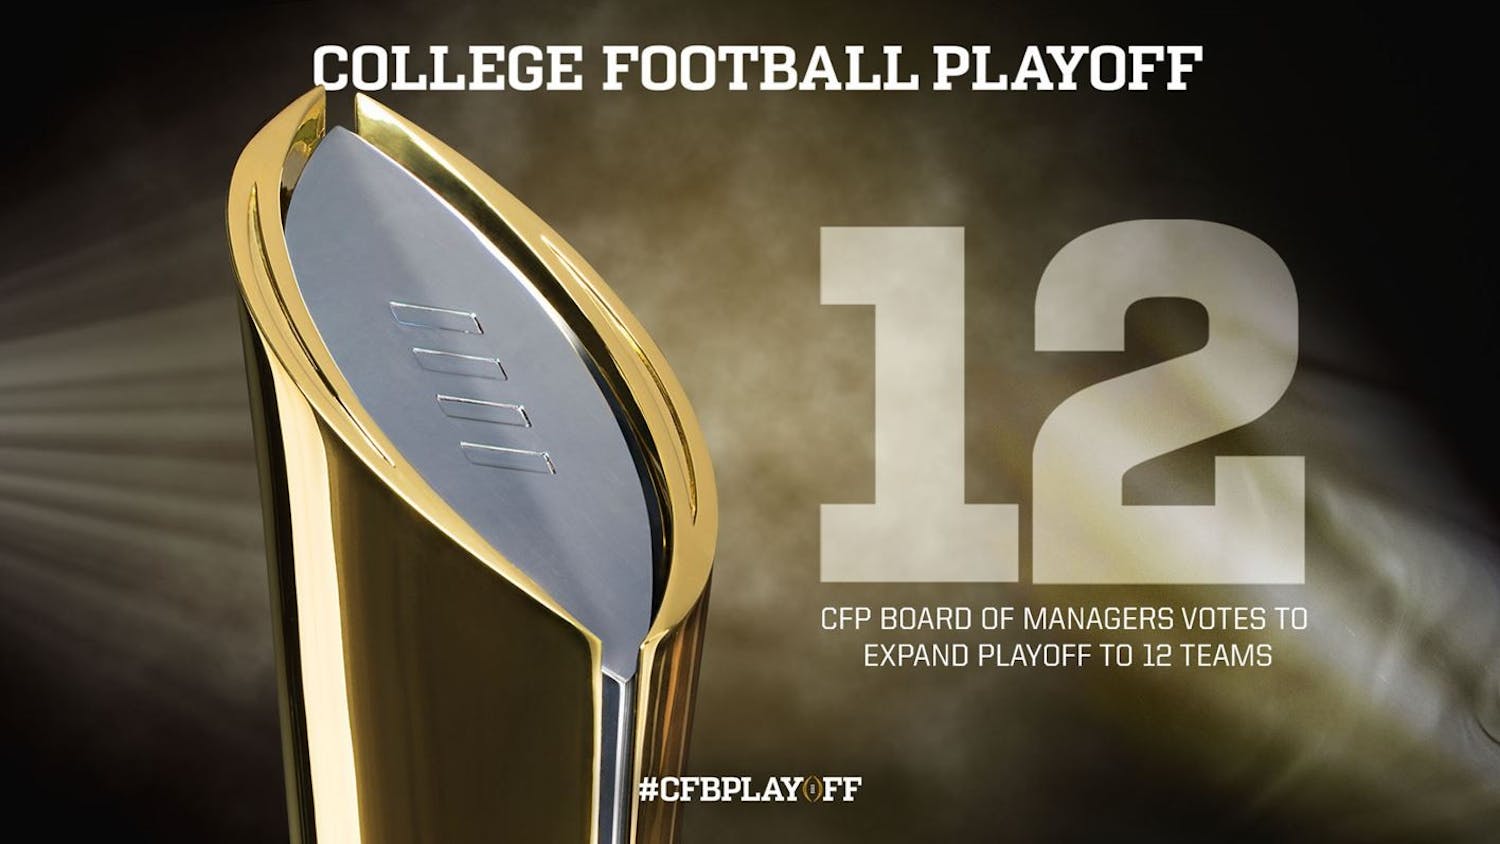 CFP_BOM_Votes_to_Expand_Playoff_to_12_Teams.jpg